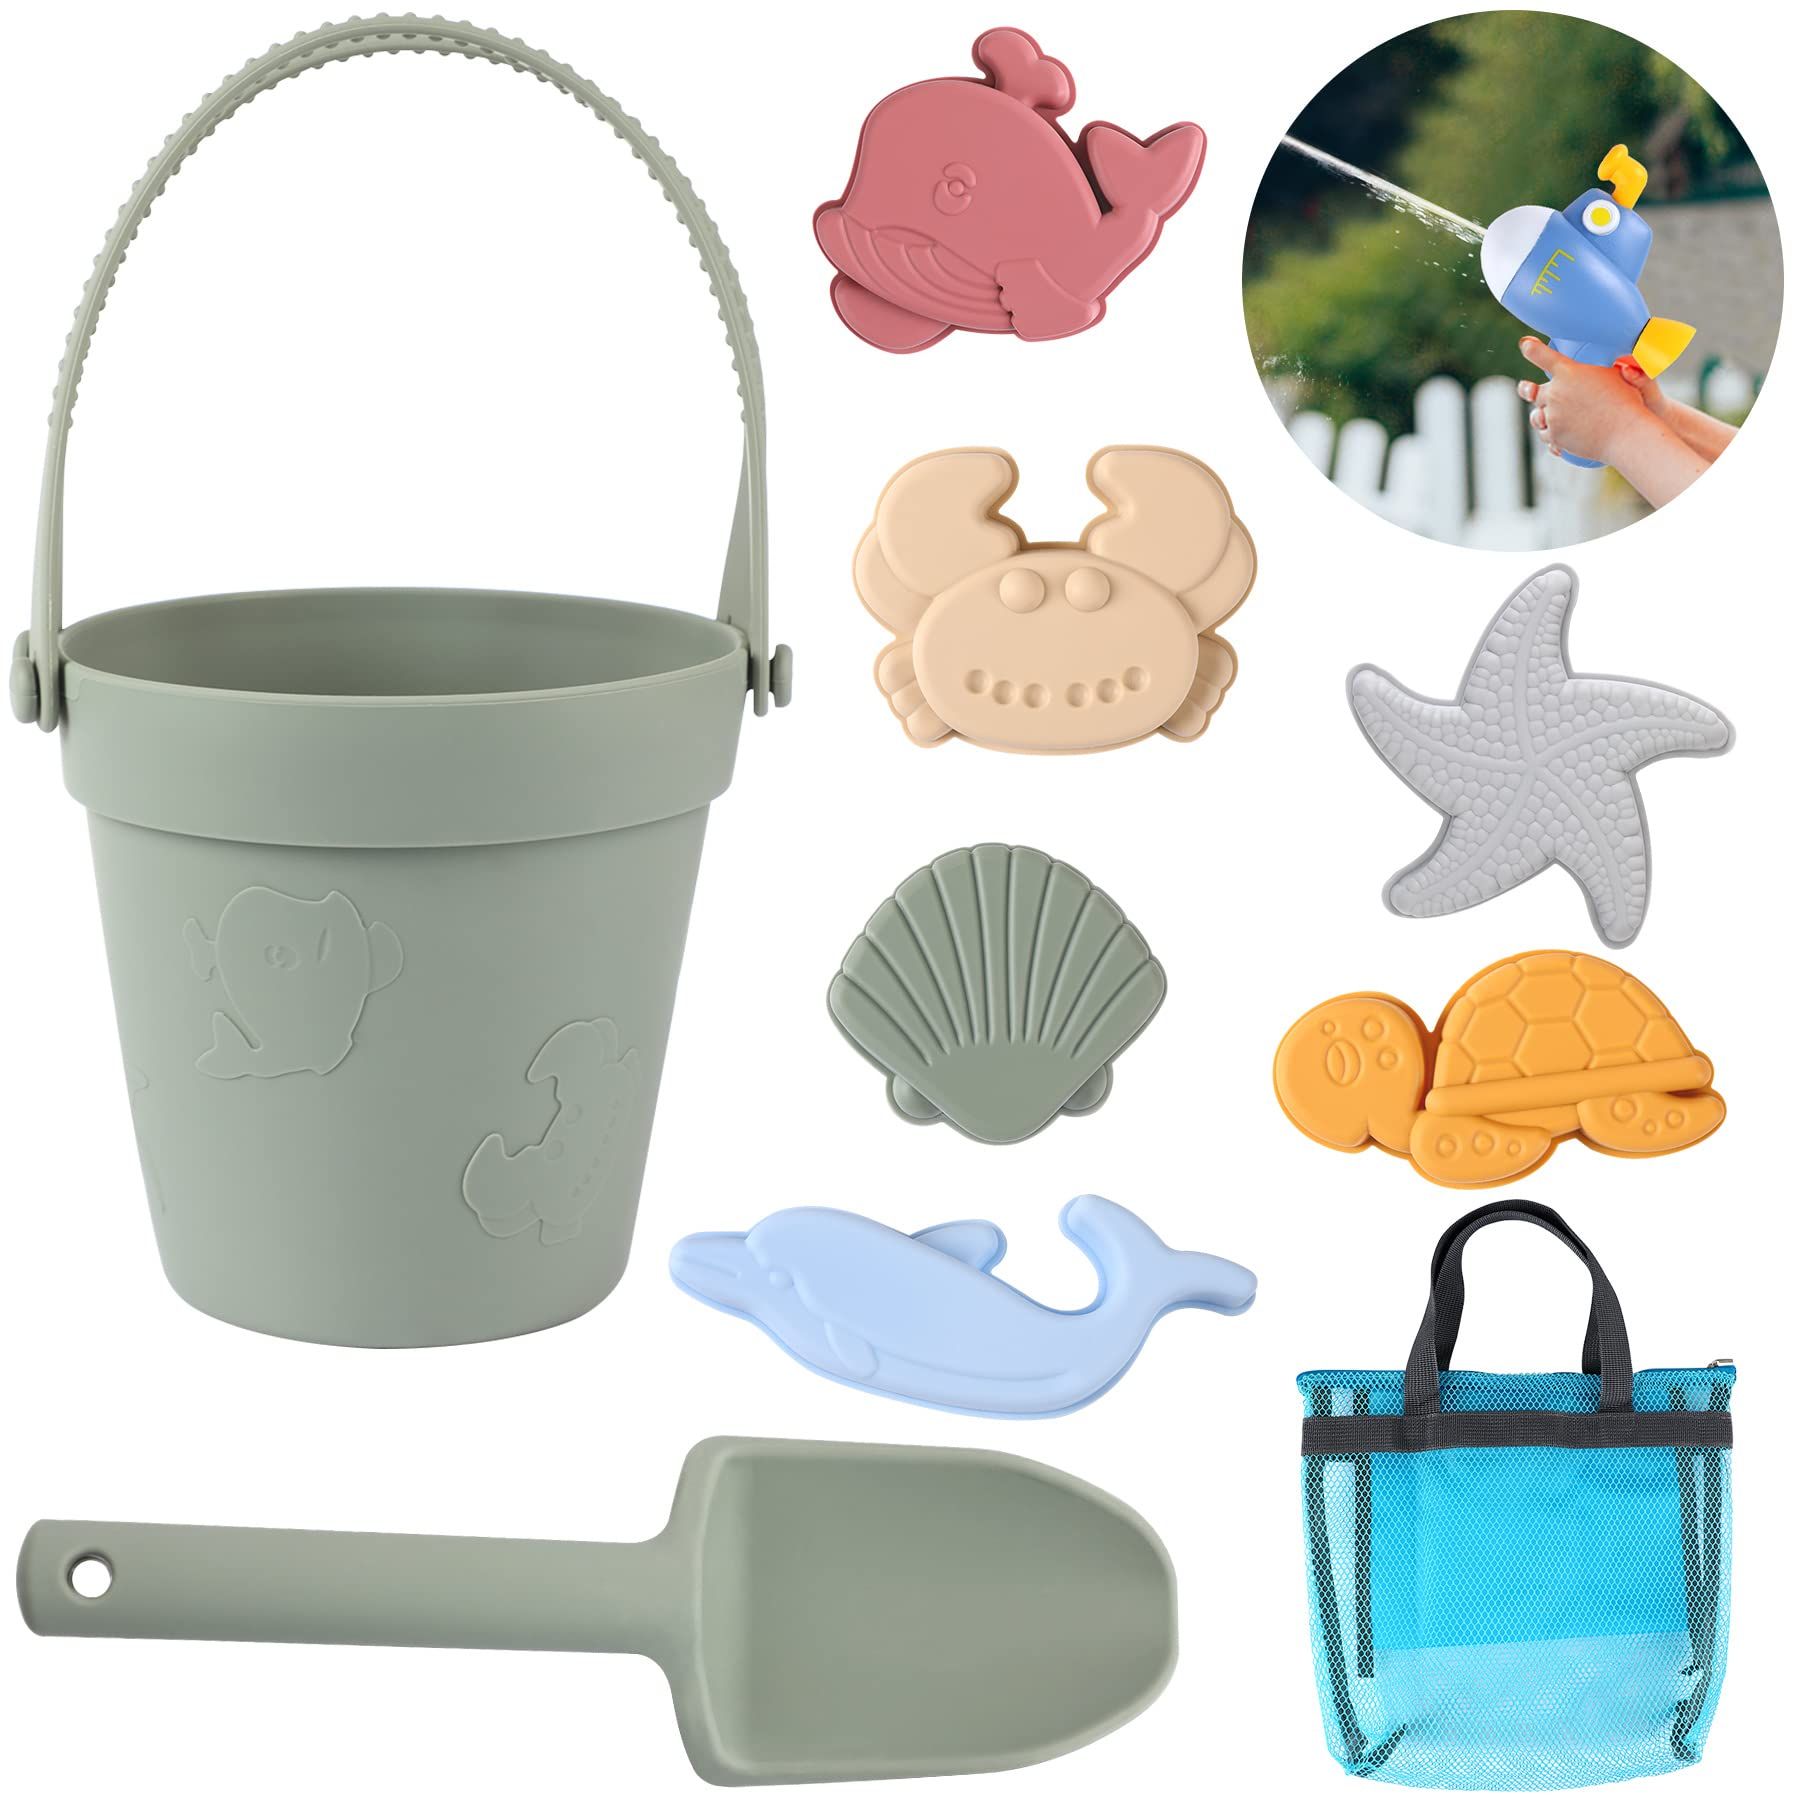 UPINS Silicone Beach Toys Beach Accessories Set for Kids Toddler Baby Sandbox Toys with Beach Bag fo | Amazon (US)